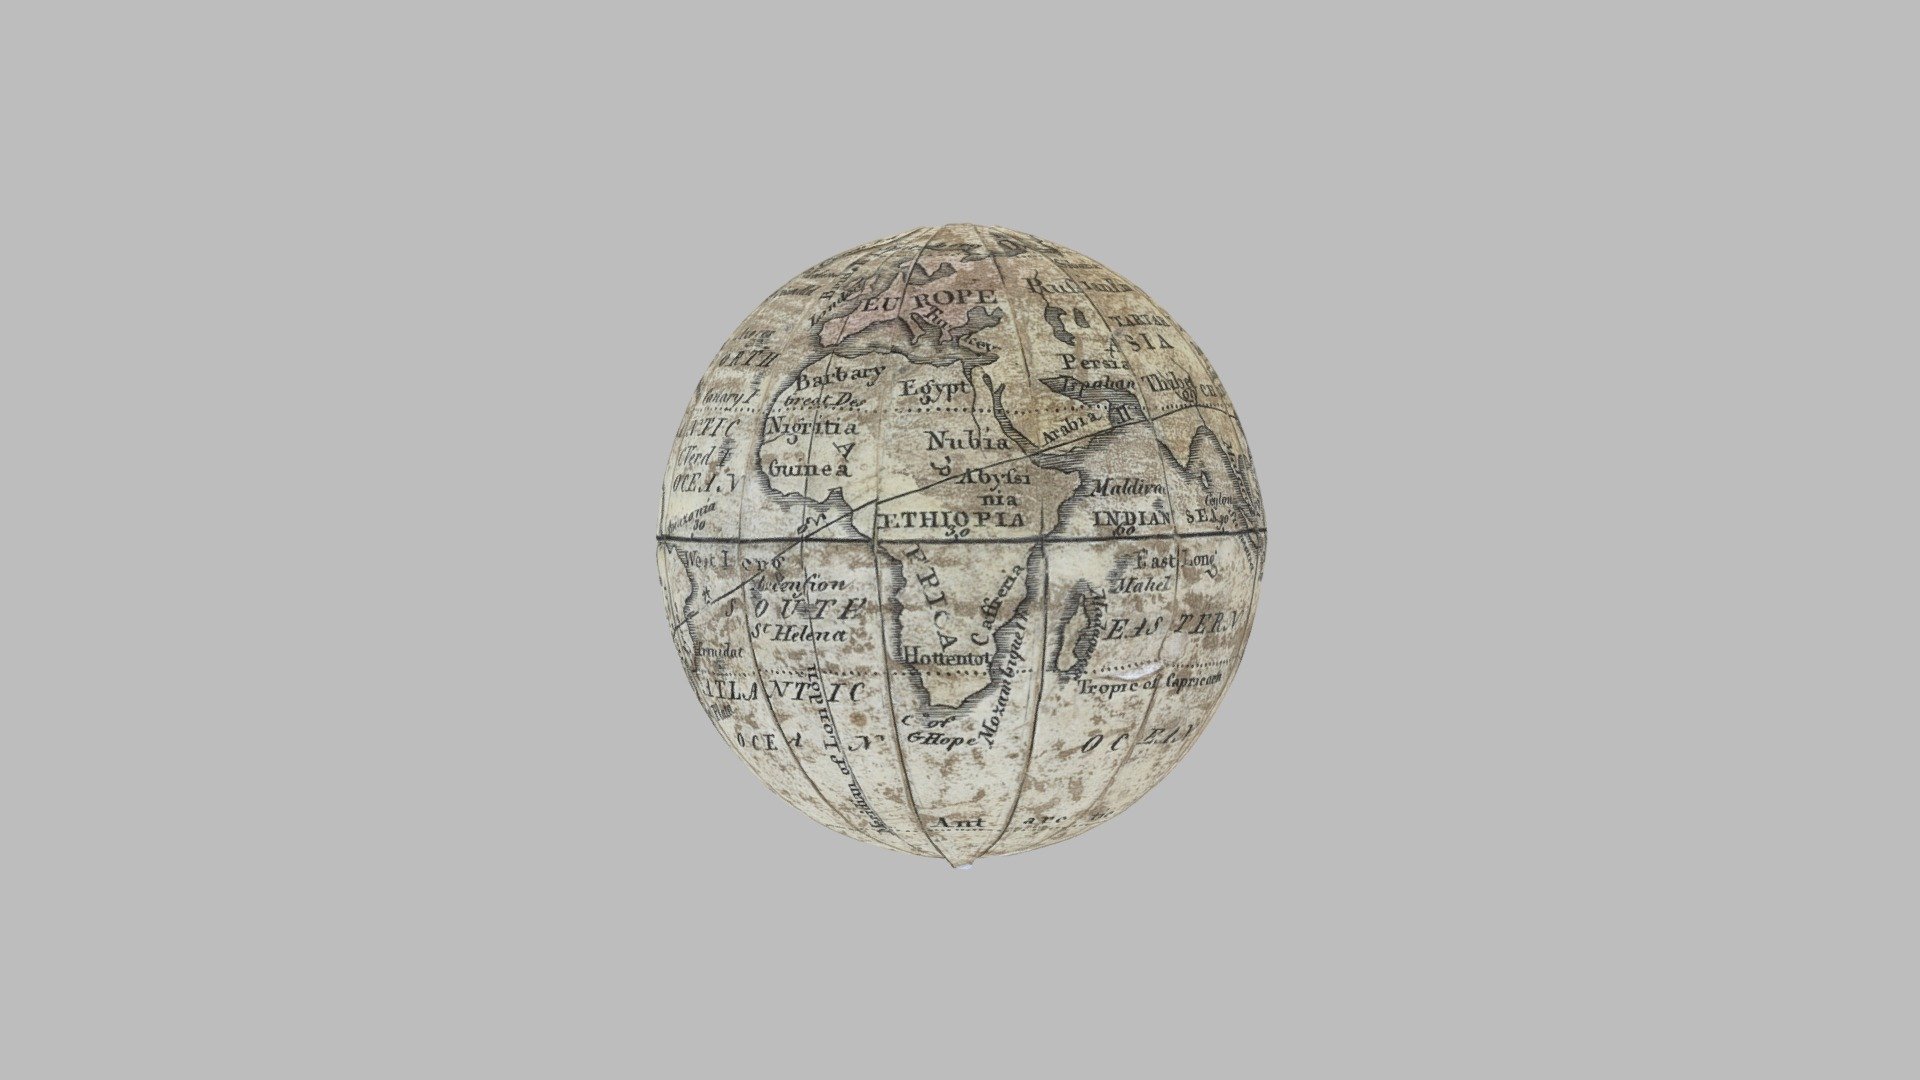 The world with its inhabitants by Carl Baur 1825